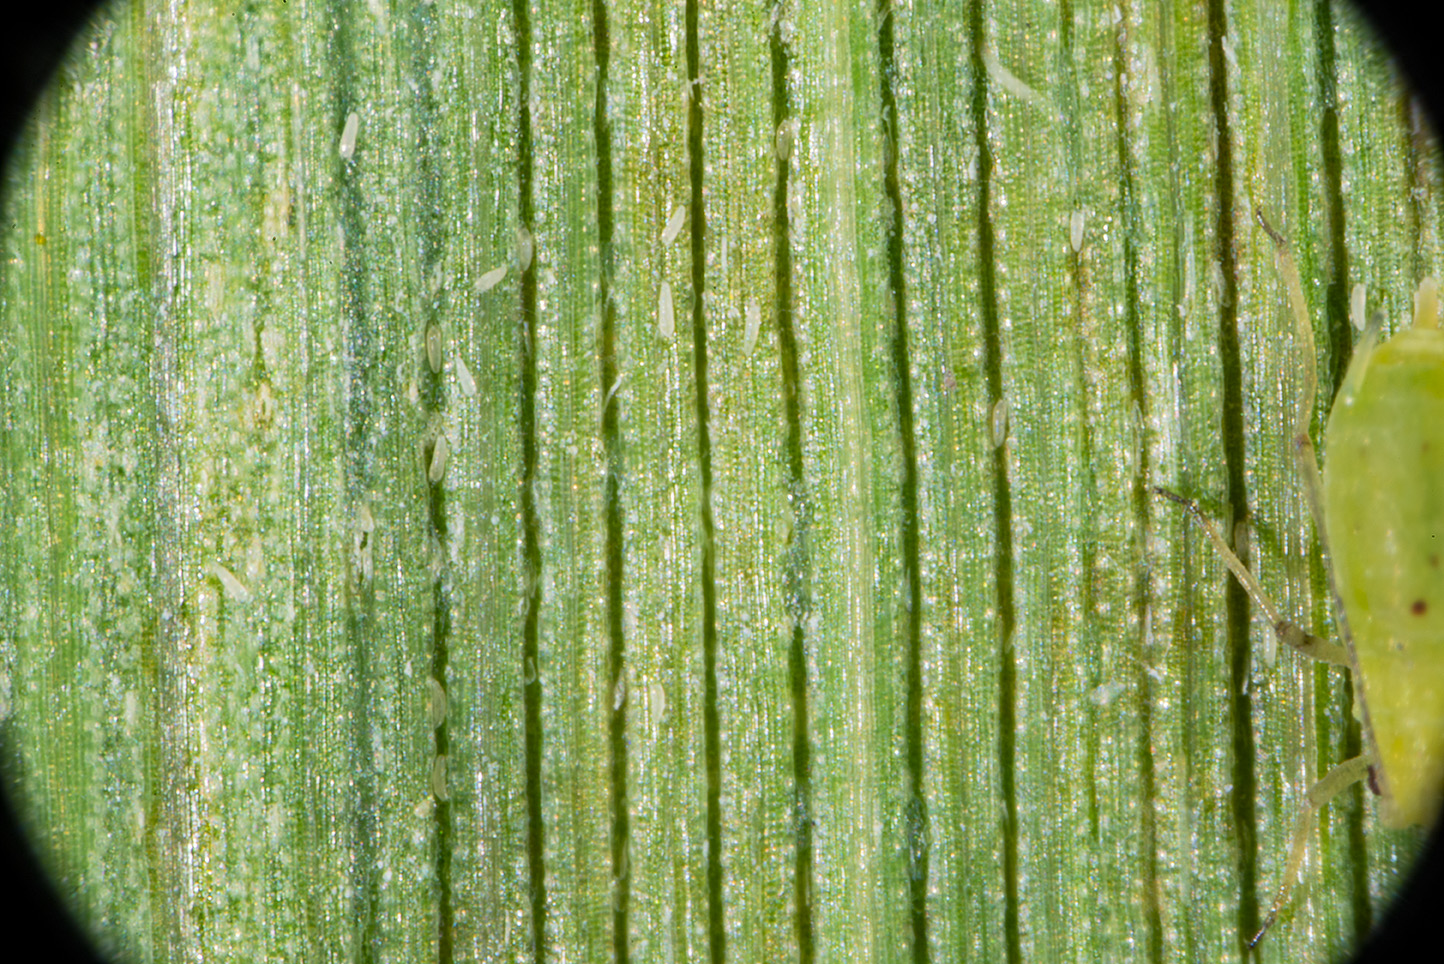 Closer view of timothy leaf tissue with cereal rust mites, compared in size to legs of an aphid. (Photo Credit: John Obermeyer)